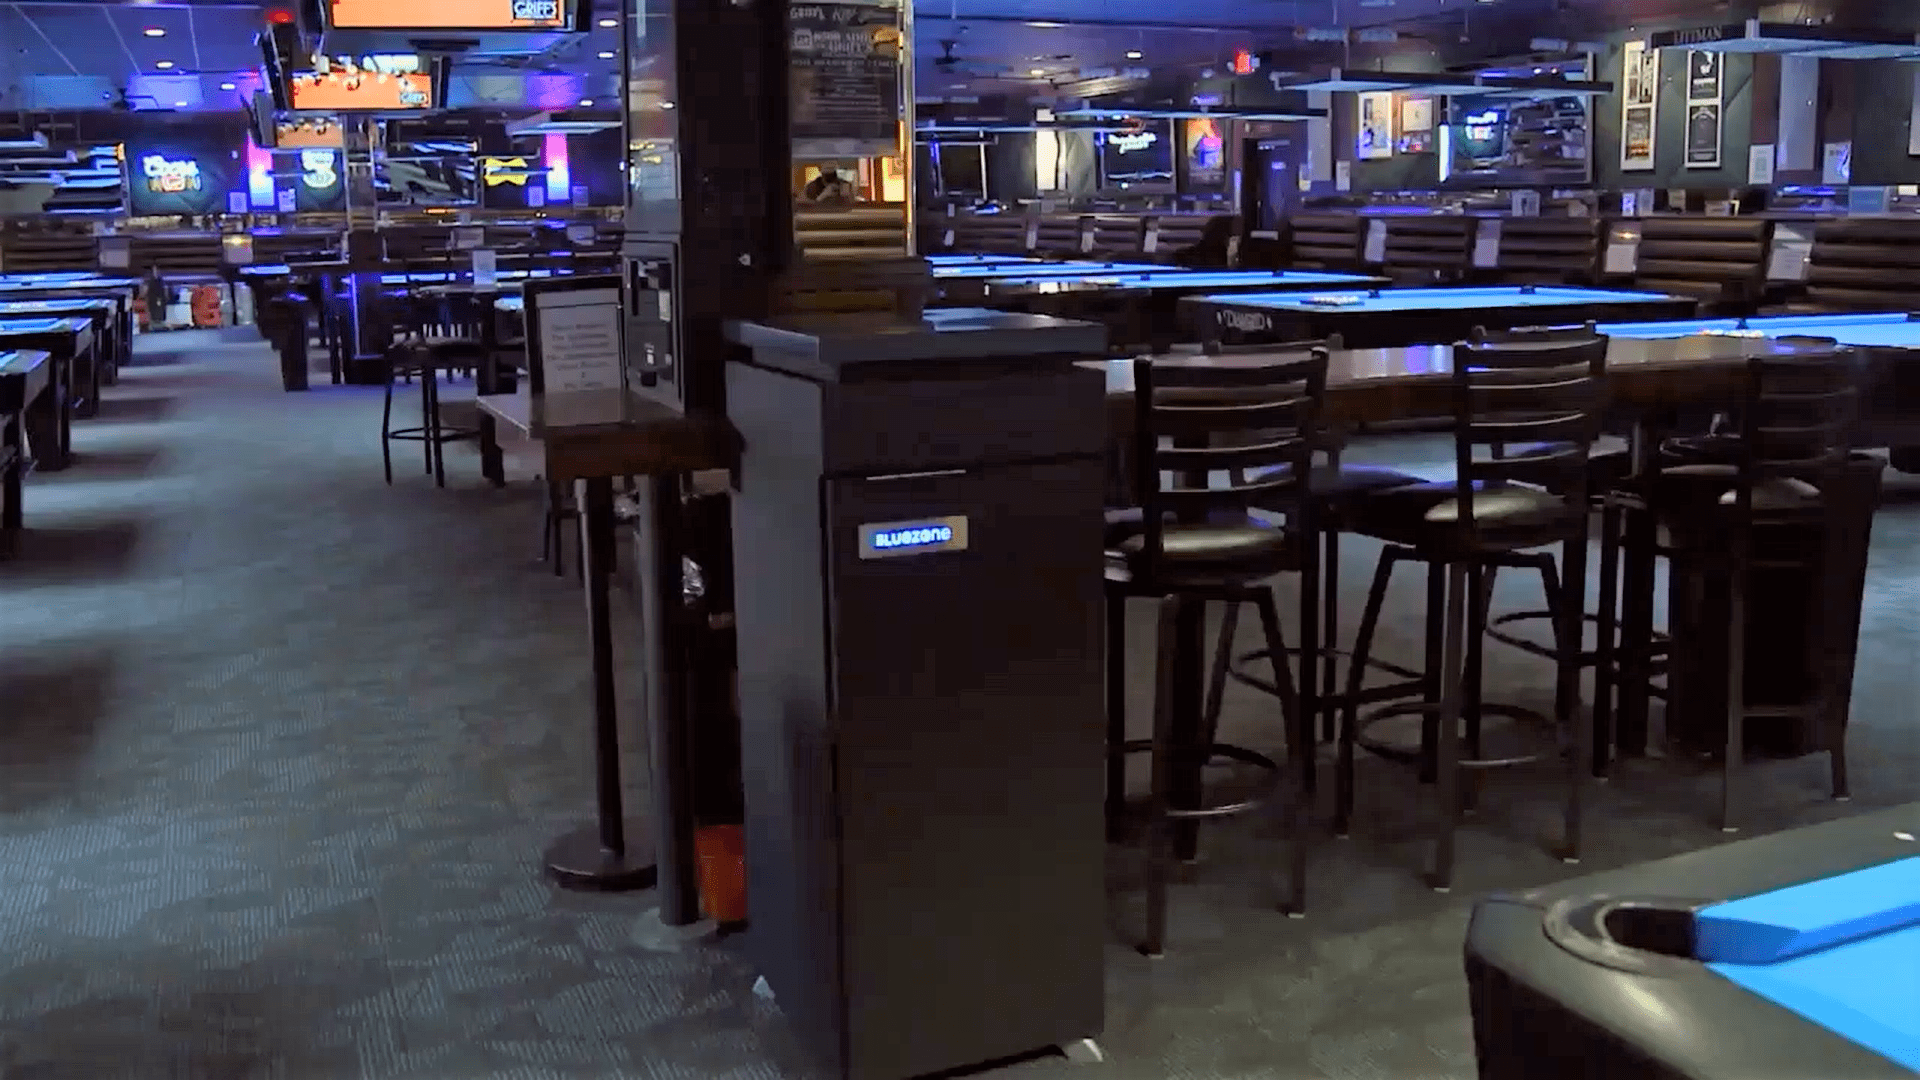 Bluezone in Bar Rescue restaurant; installed in custom cabinetry